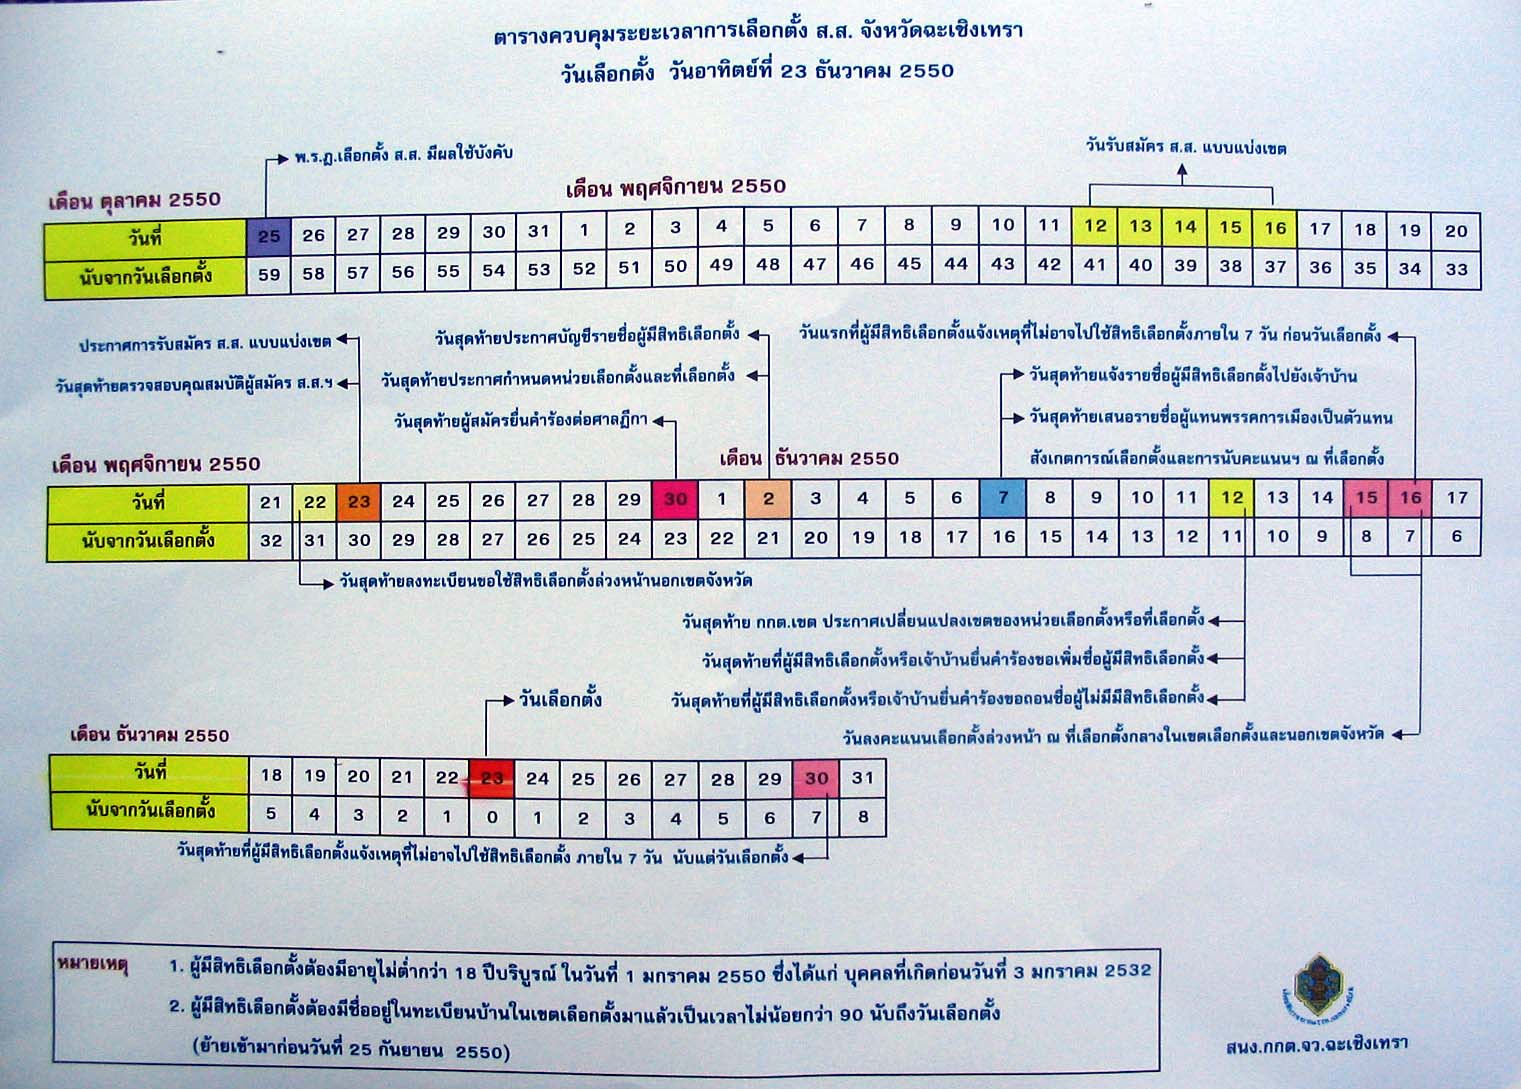 Chachoengsao election timetable 2007, Thailand